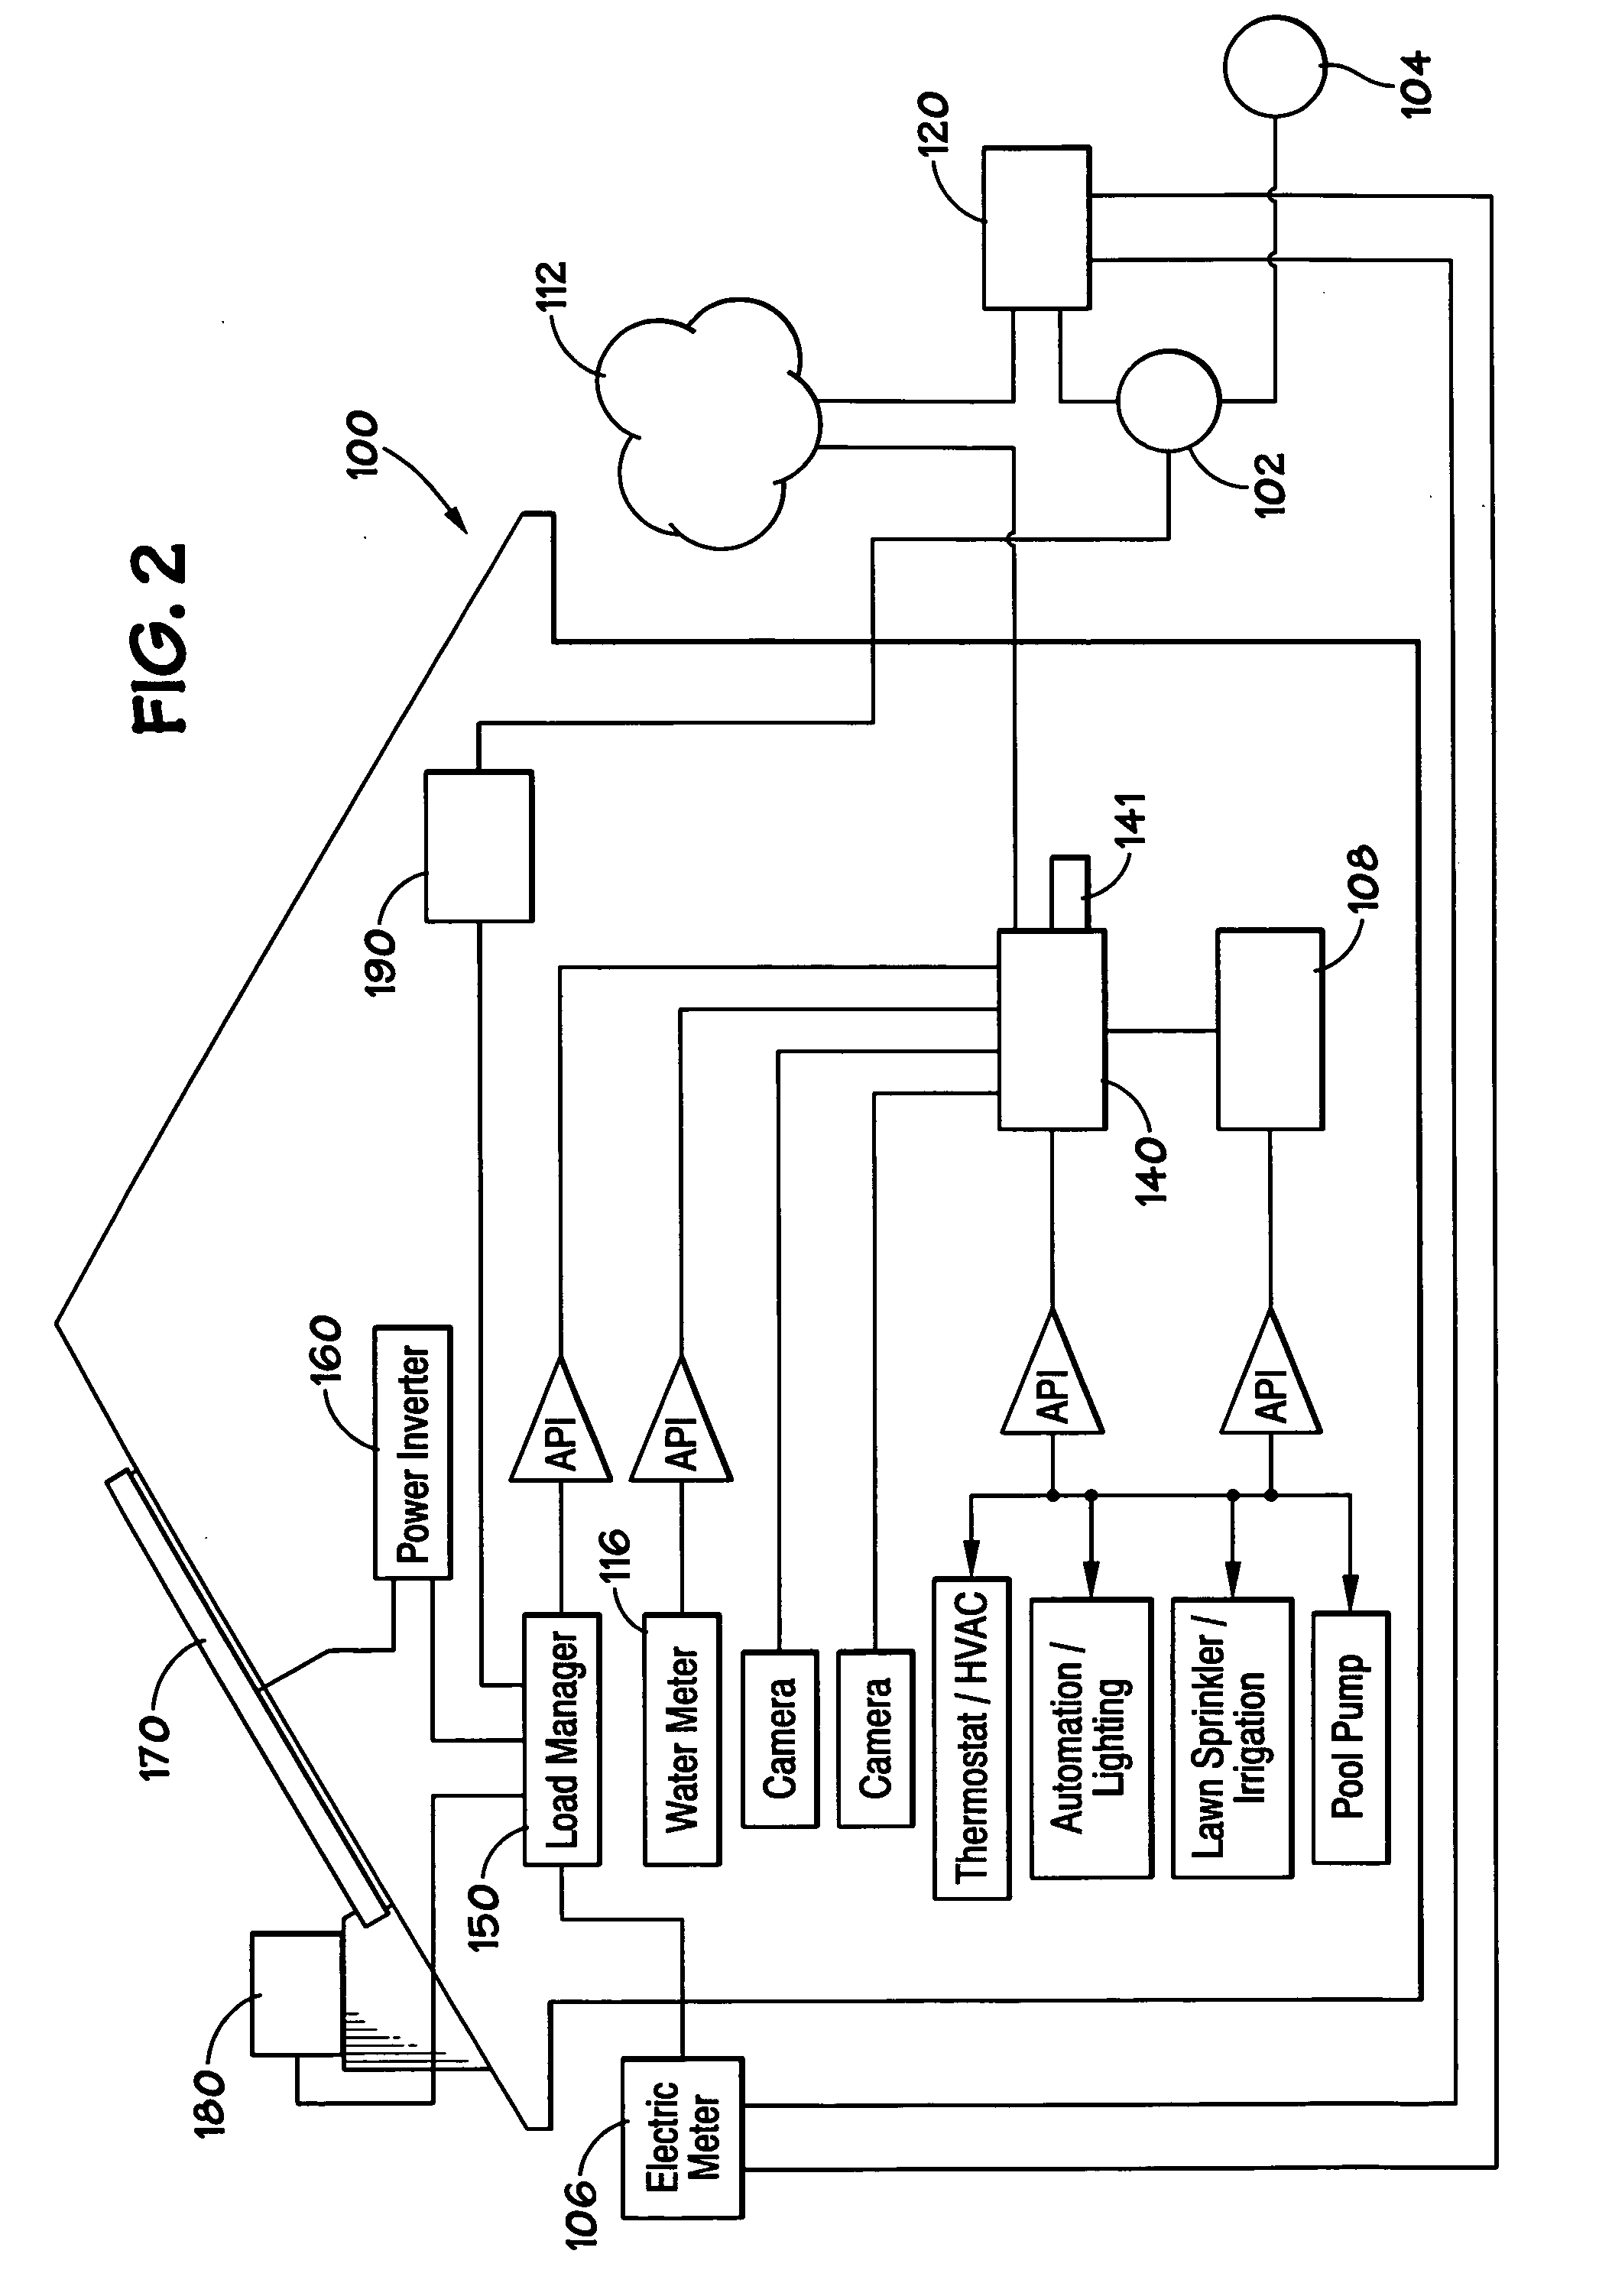 Community resource management systems and methods